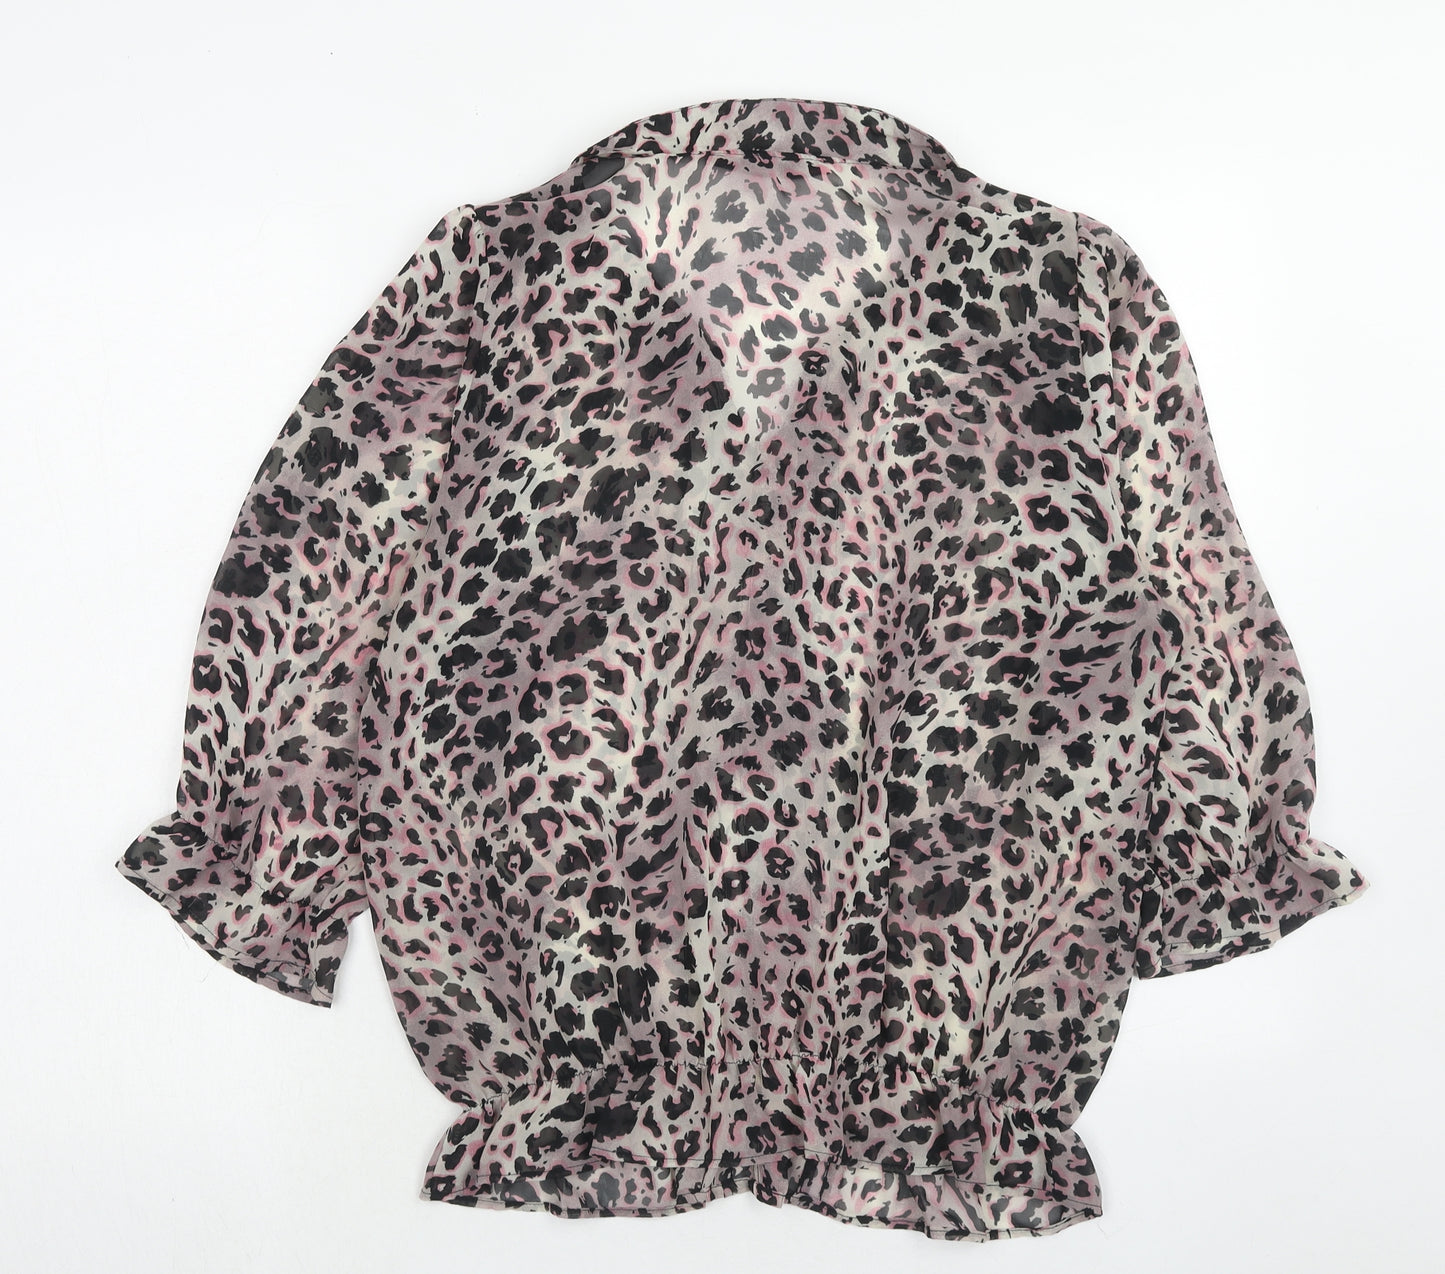 NEXT Womens Pink Animal Print Polyester Basic Blouse Size 16 Collared - Leopard Print